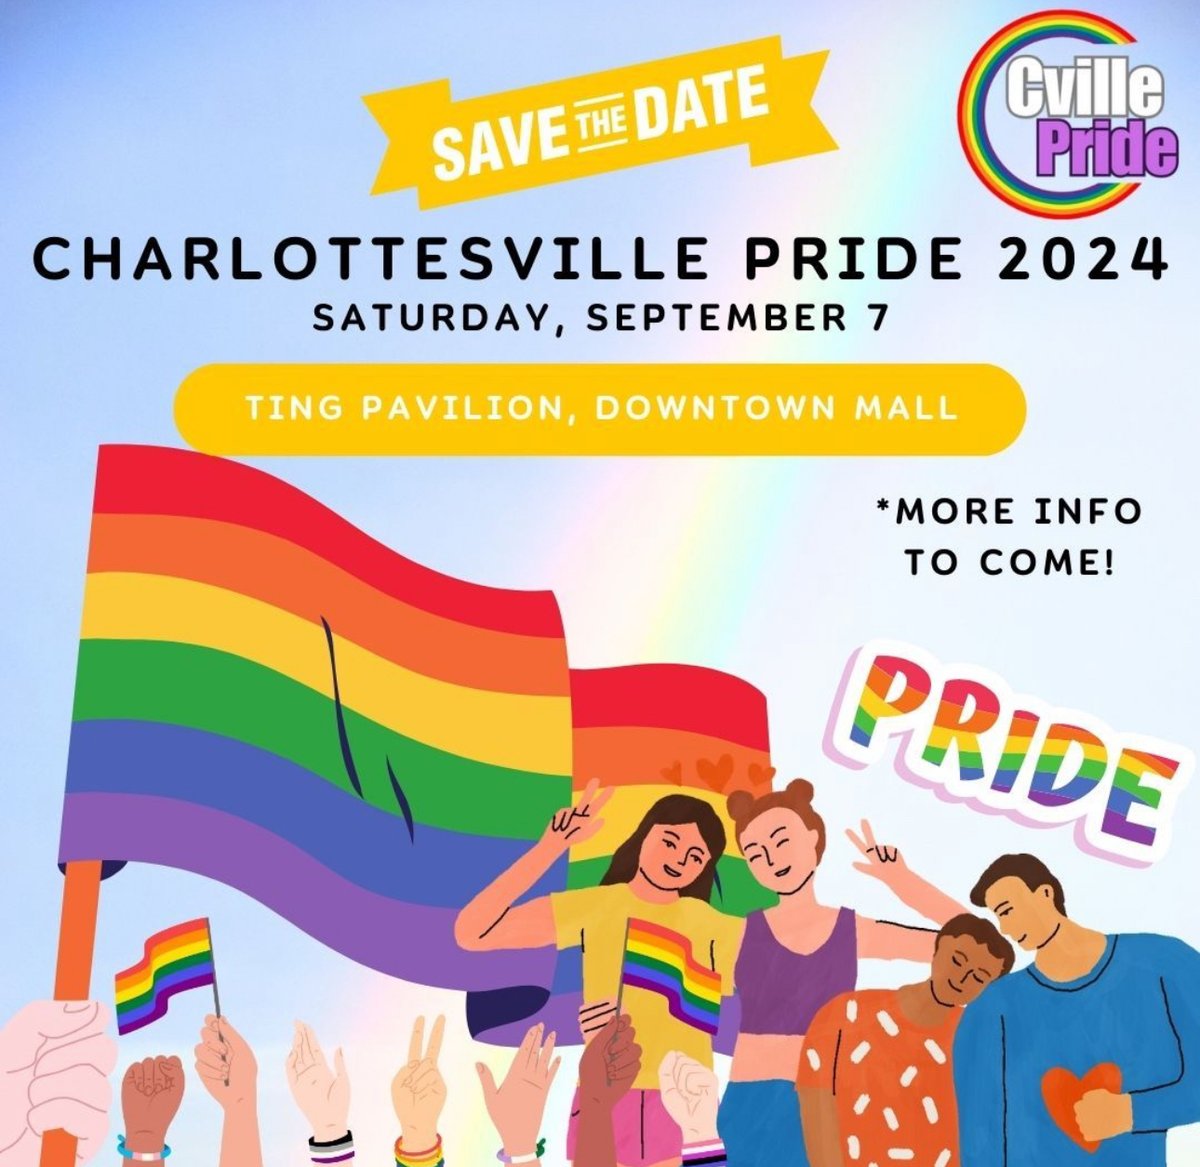 C'ville Pride is Saturday, September 7th at @tingpavilion!🏳️‍🌈✨️To learn more, make sure you're following @charlottesvillepride. You'll find updates, vendor applications, volunteer applications and more! We are so excited to celebrate Pride in Charlottesville!🎉